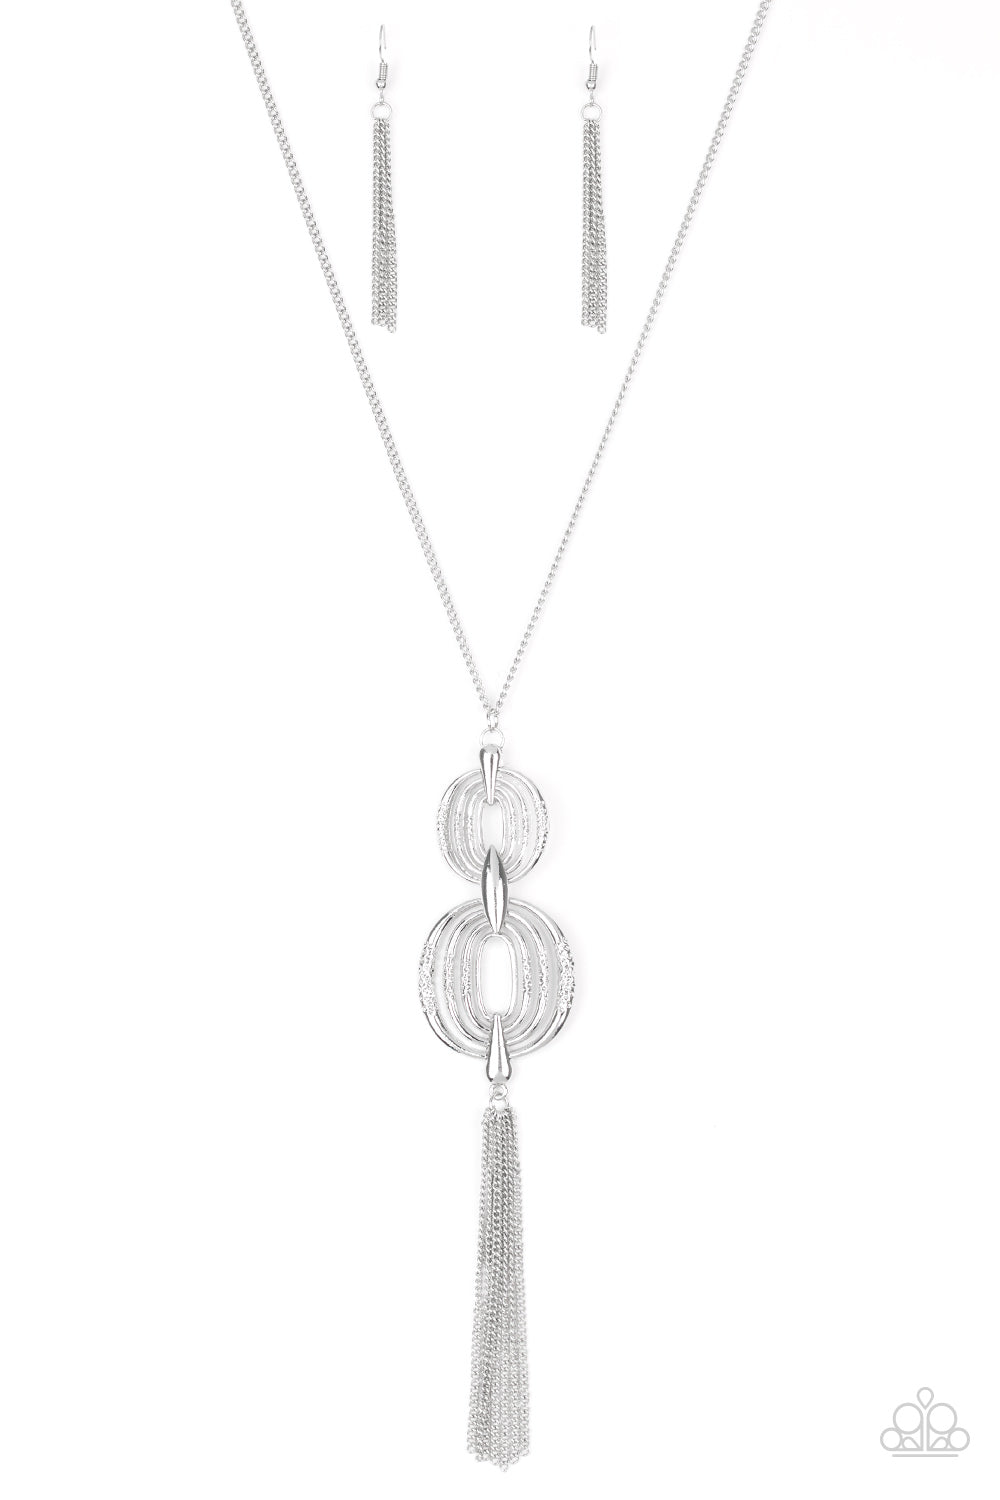 Delicately hammered in sections of shimmer, silver circular frames stack into a bold pendant at the bottom of a lengthened silver chain. A shimmery silver tassel swings from the bottom of the stacked pendant for a casual finish. Features an adjustable clasp closure